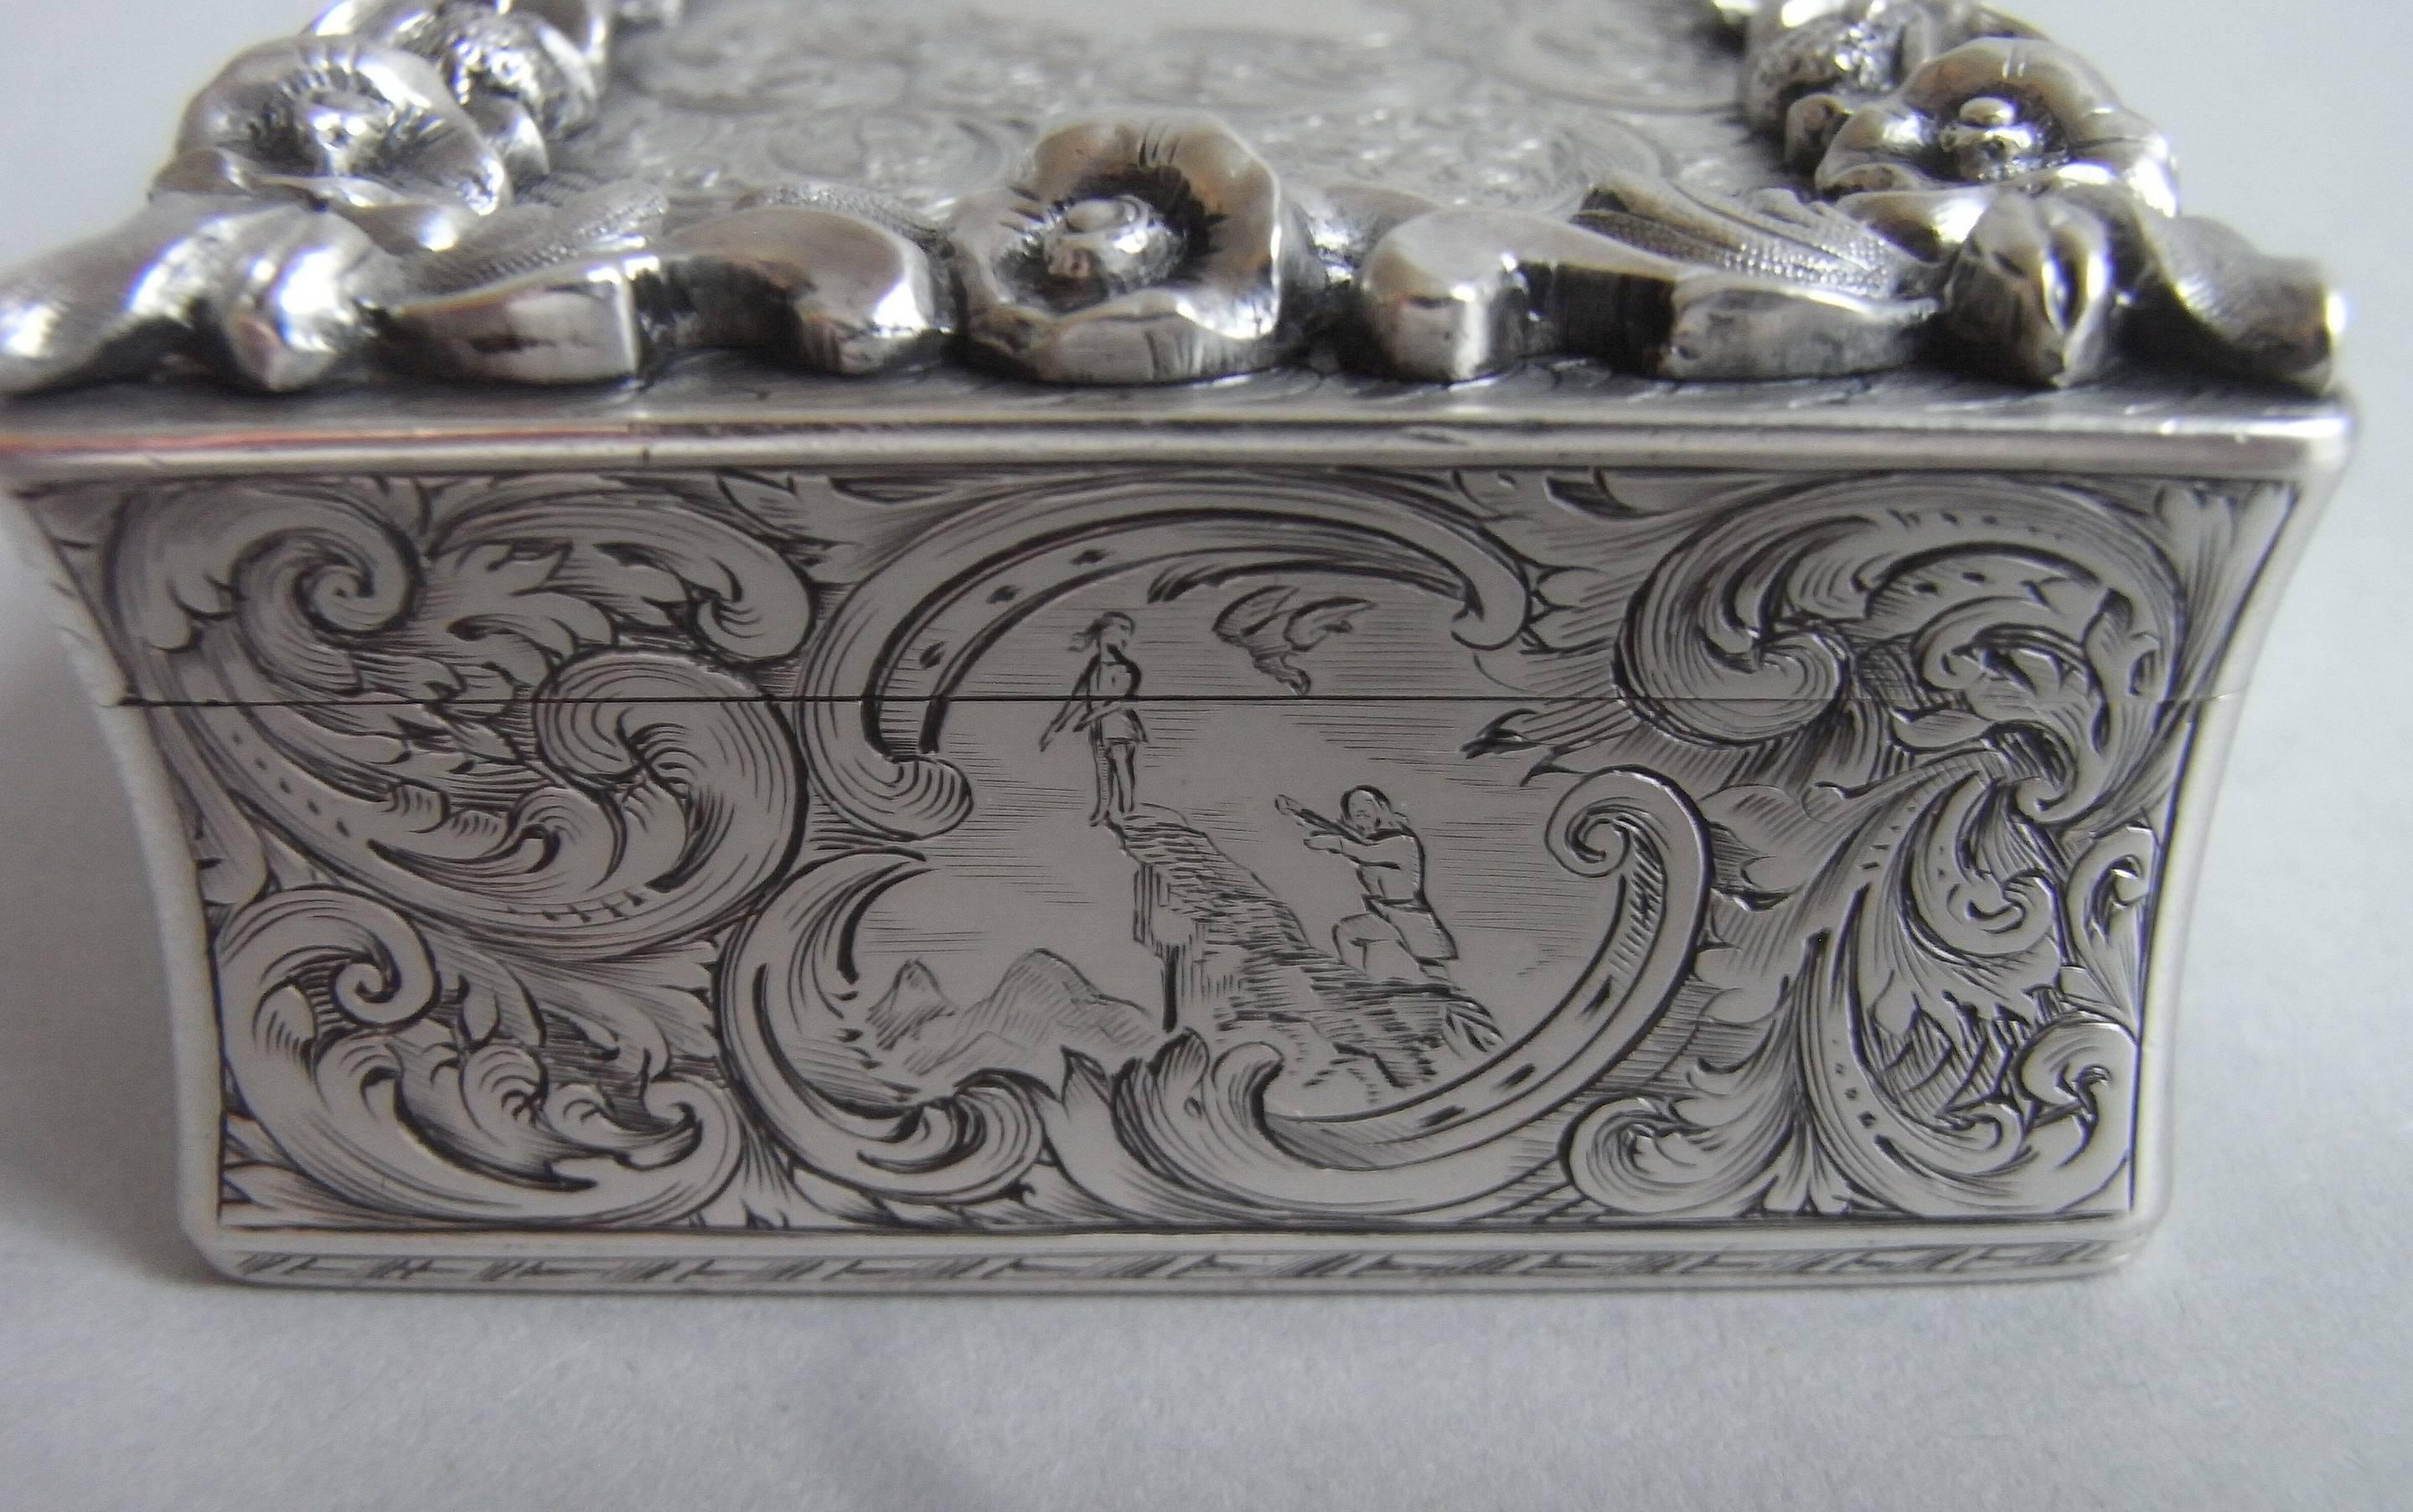 Fine and Rare Table Snuff Box Made in London in by Rawlings & Summers 1